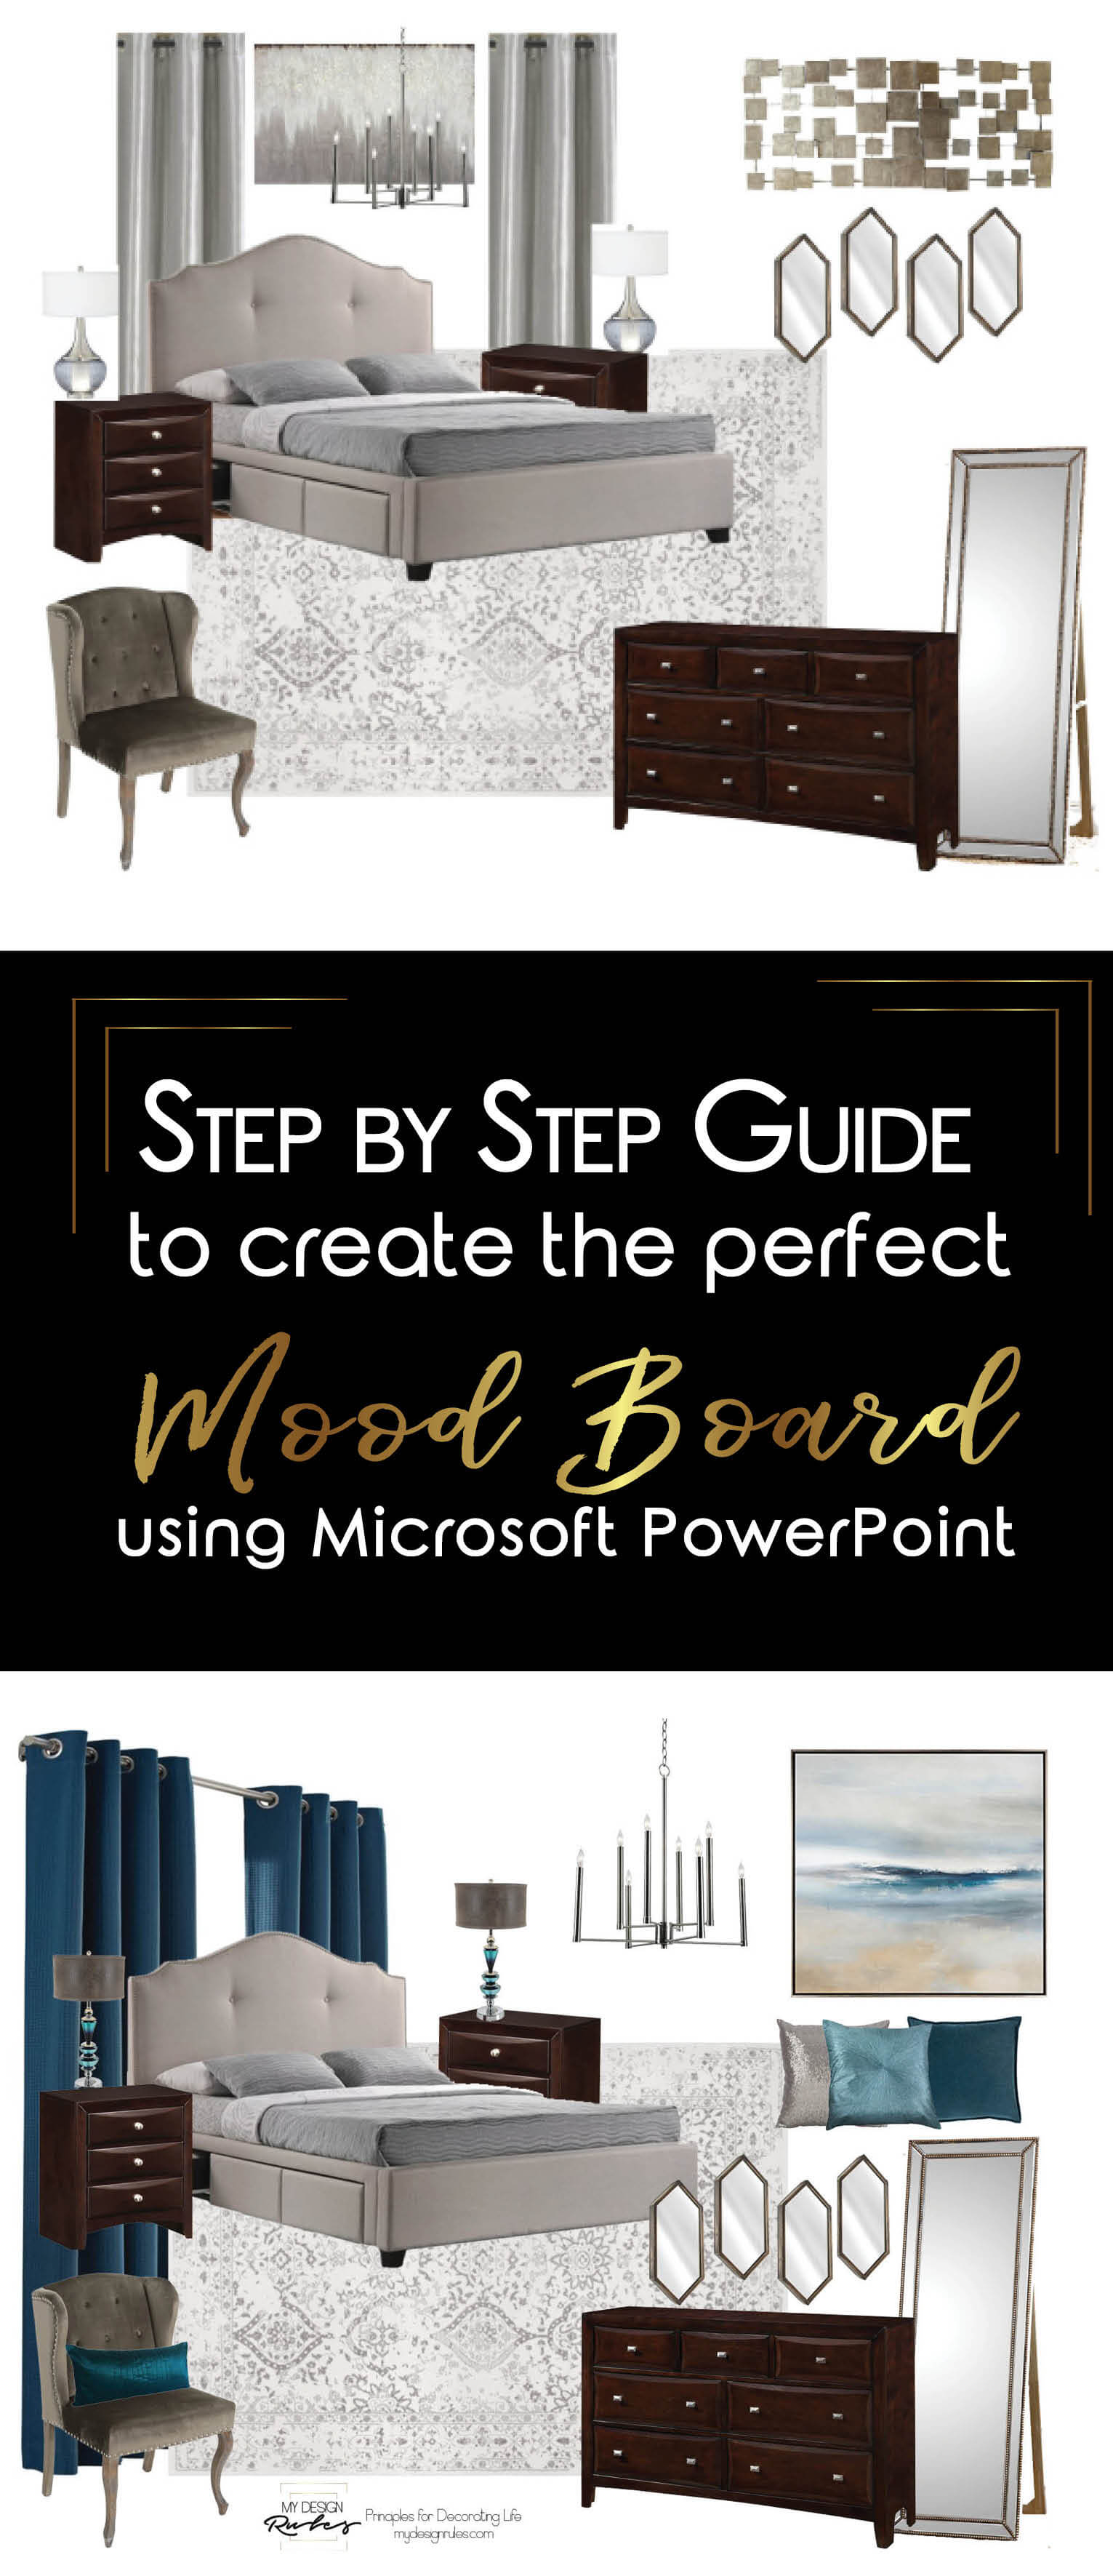 Step by Step tutorial to decorate your dream room like a pro. #moodboard #tutorial #diydecorating